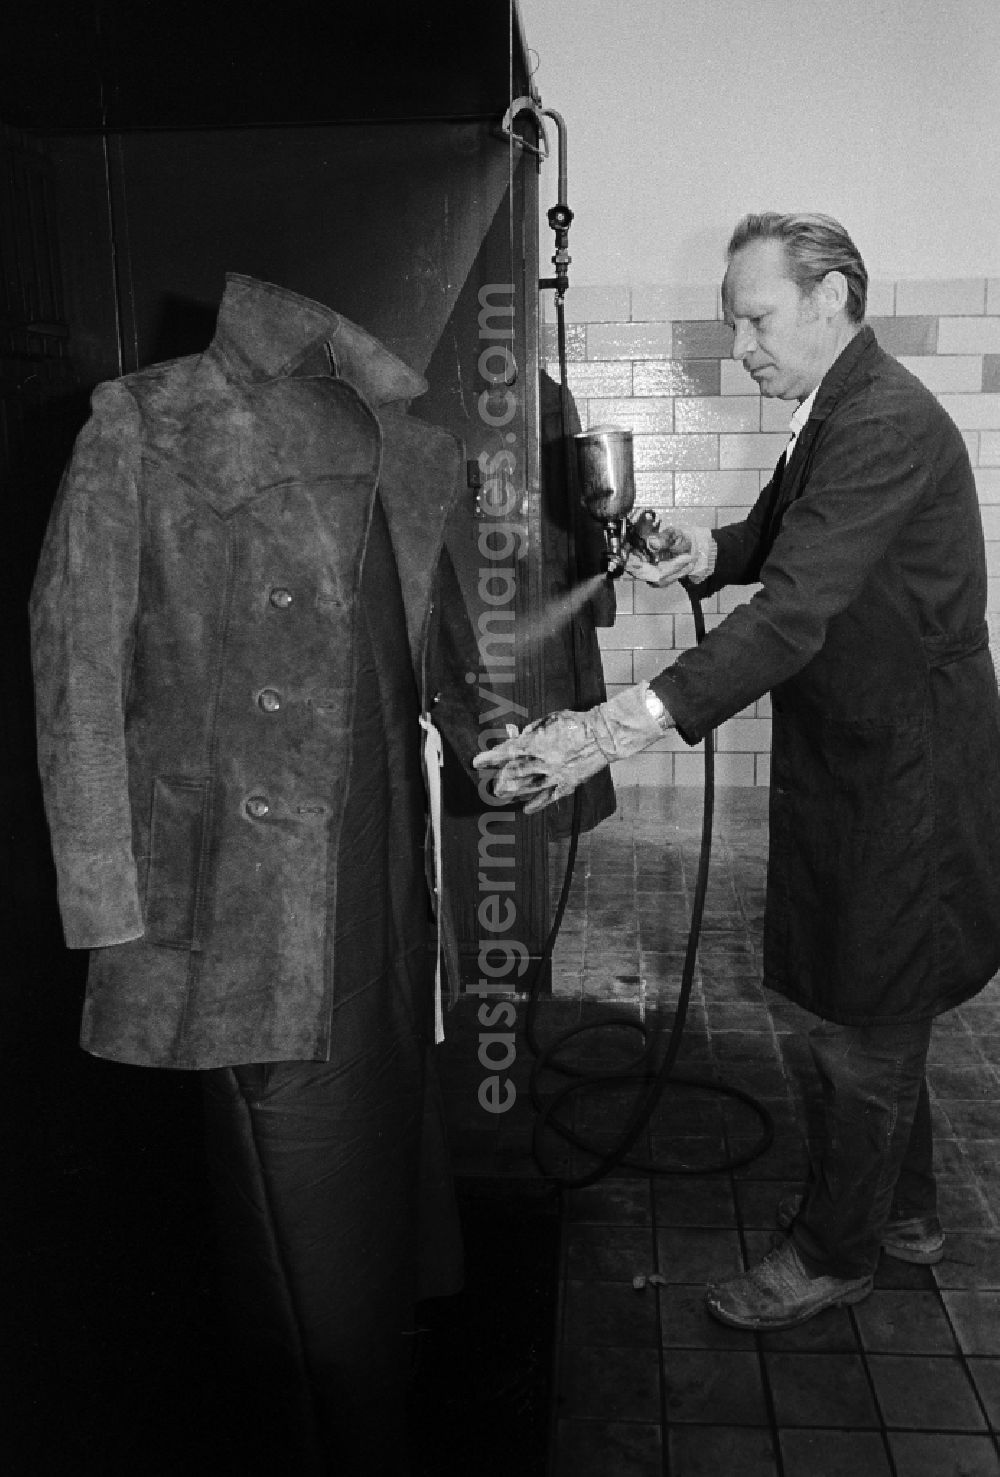 GDR image archive: Berlin - A worker in the VEB united laundrys Berlin Rewatex with clean of a coat in Berlin, the former capital of the GDR, German democratic republic